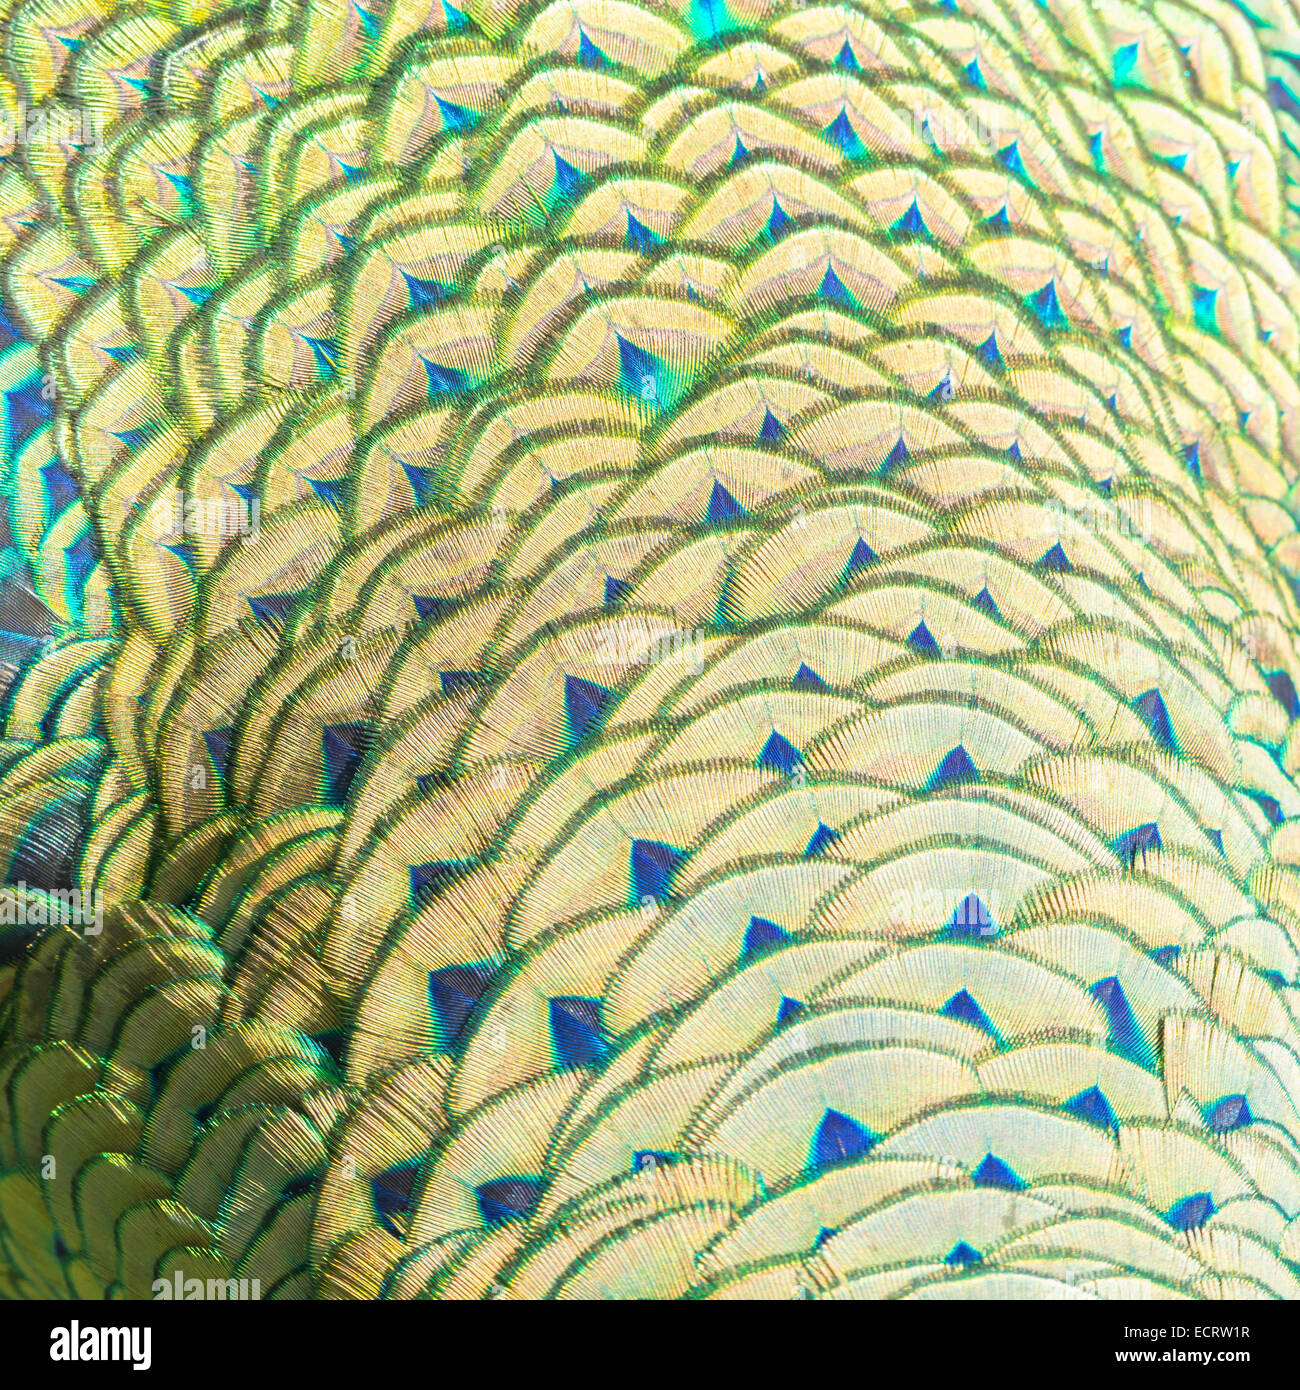 Green and blue bird plumage, green peacock feathers, texture background Stock Photo